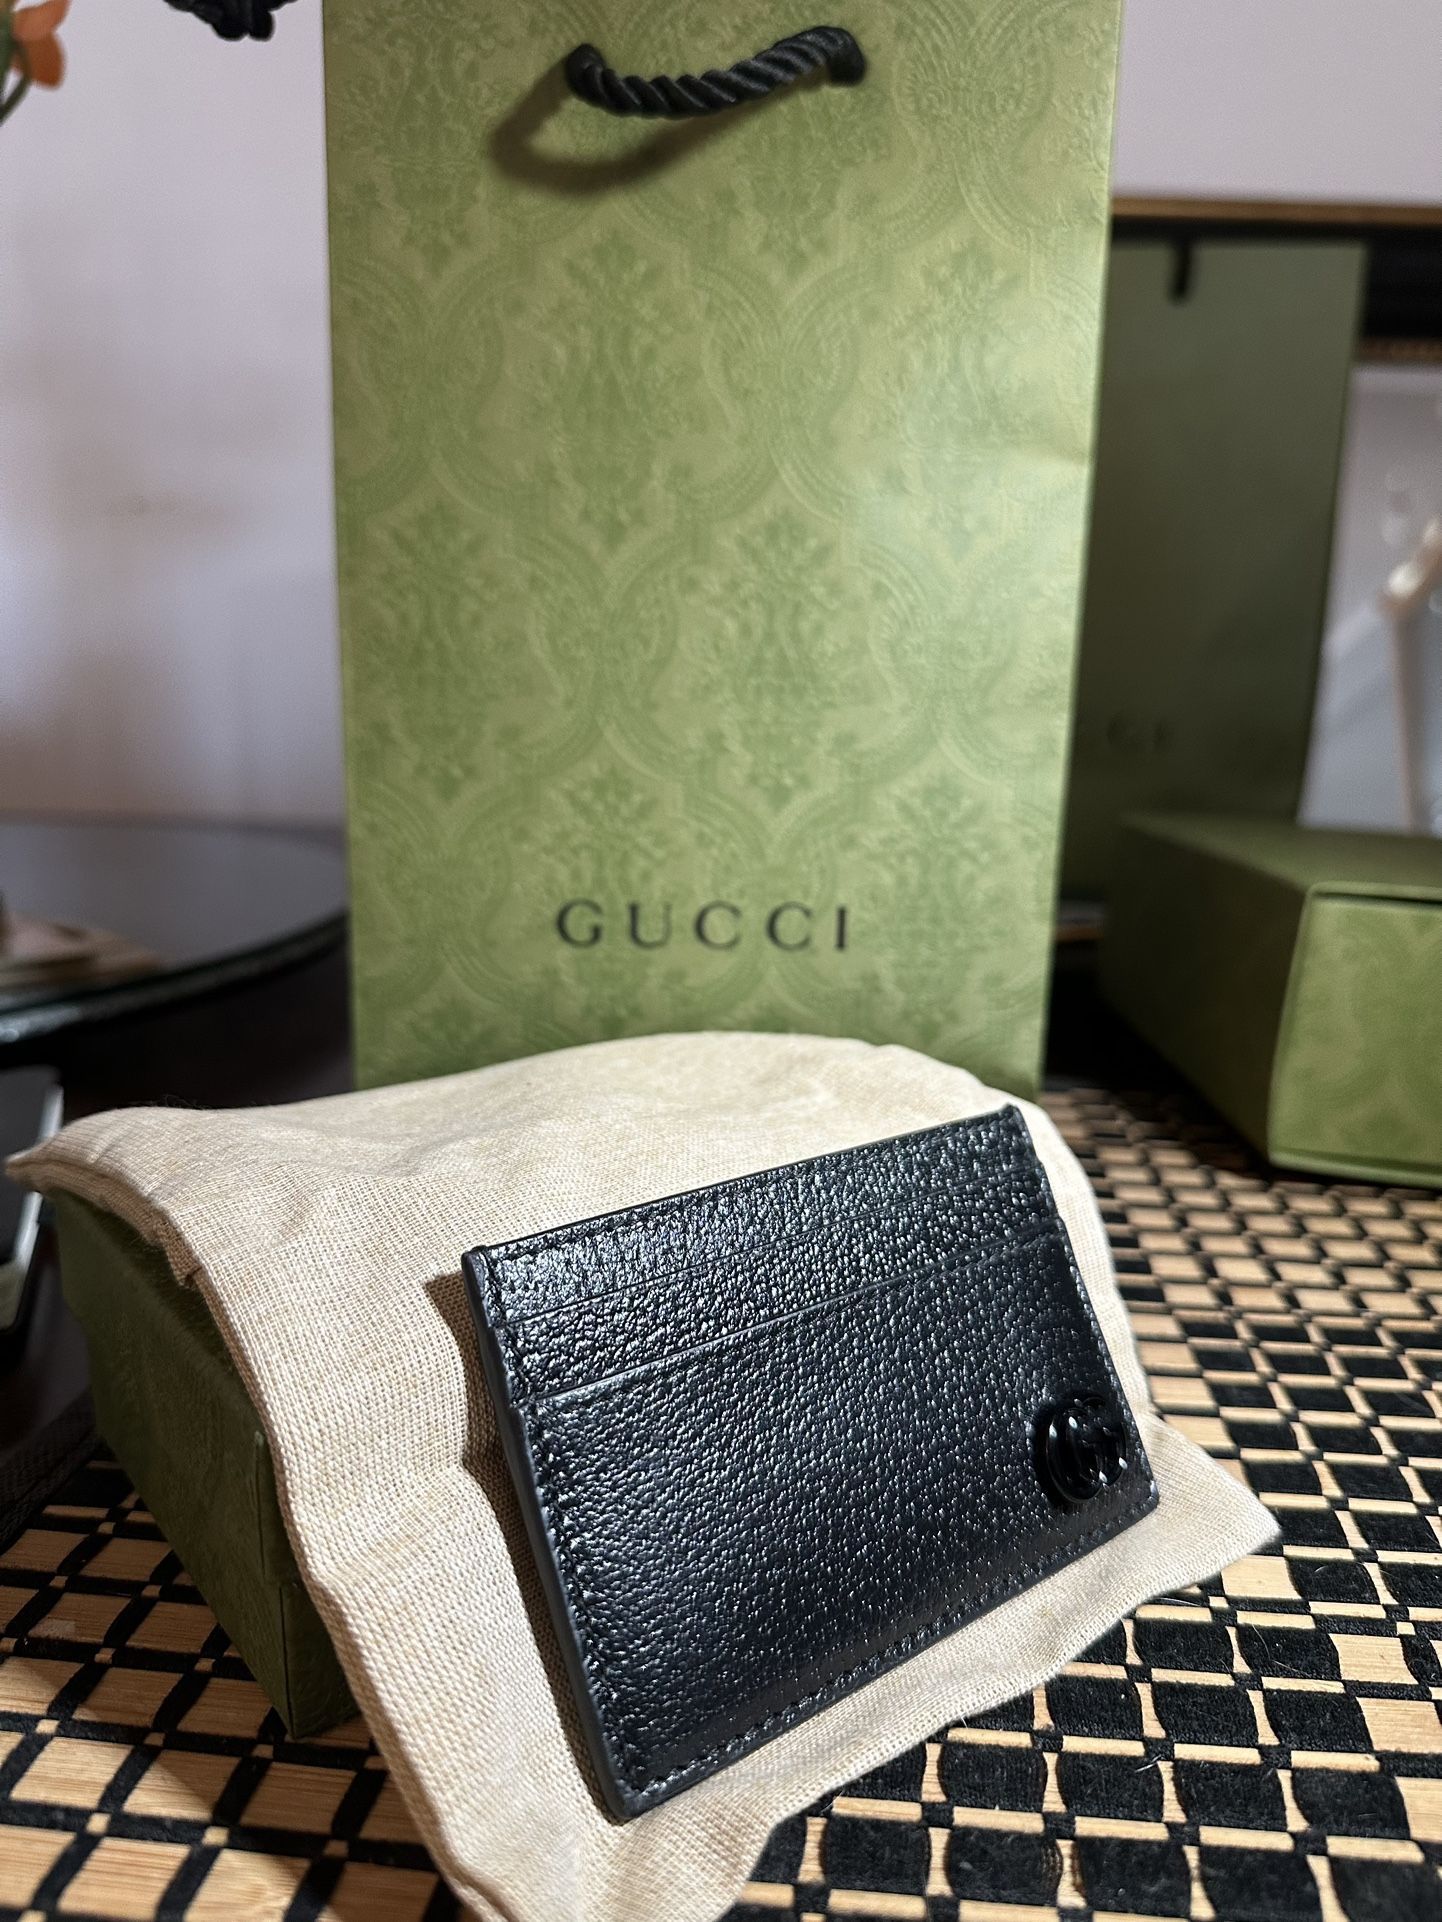 (Gucci) GG Marmont leather card holder